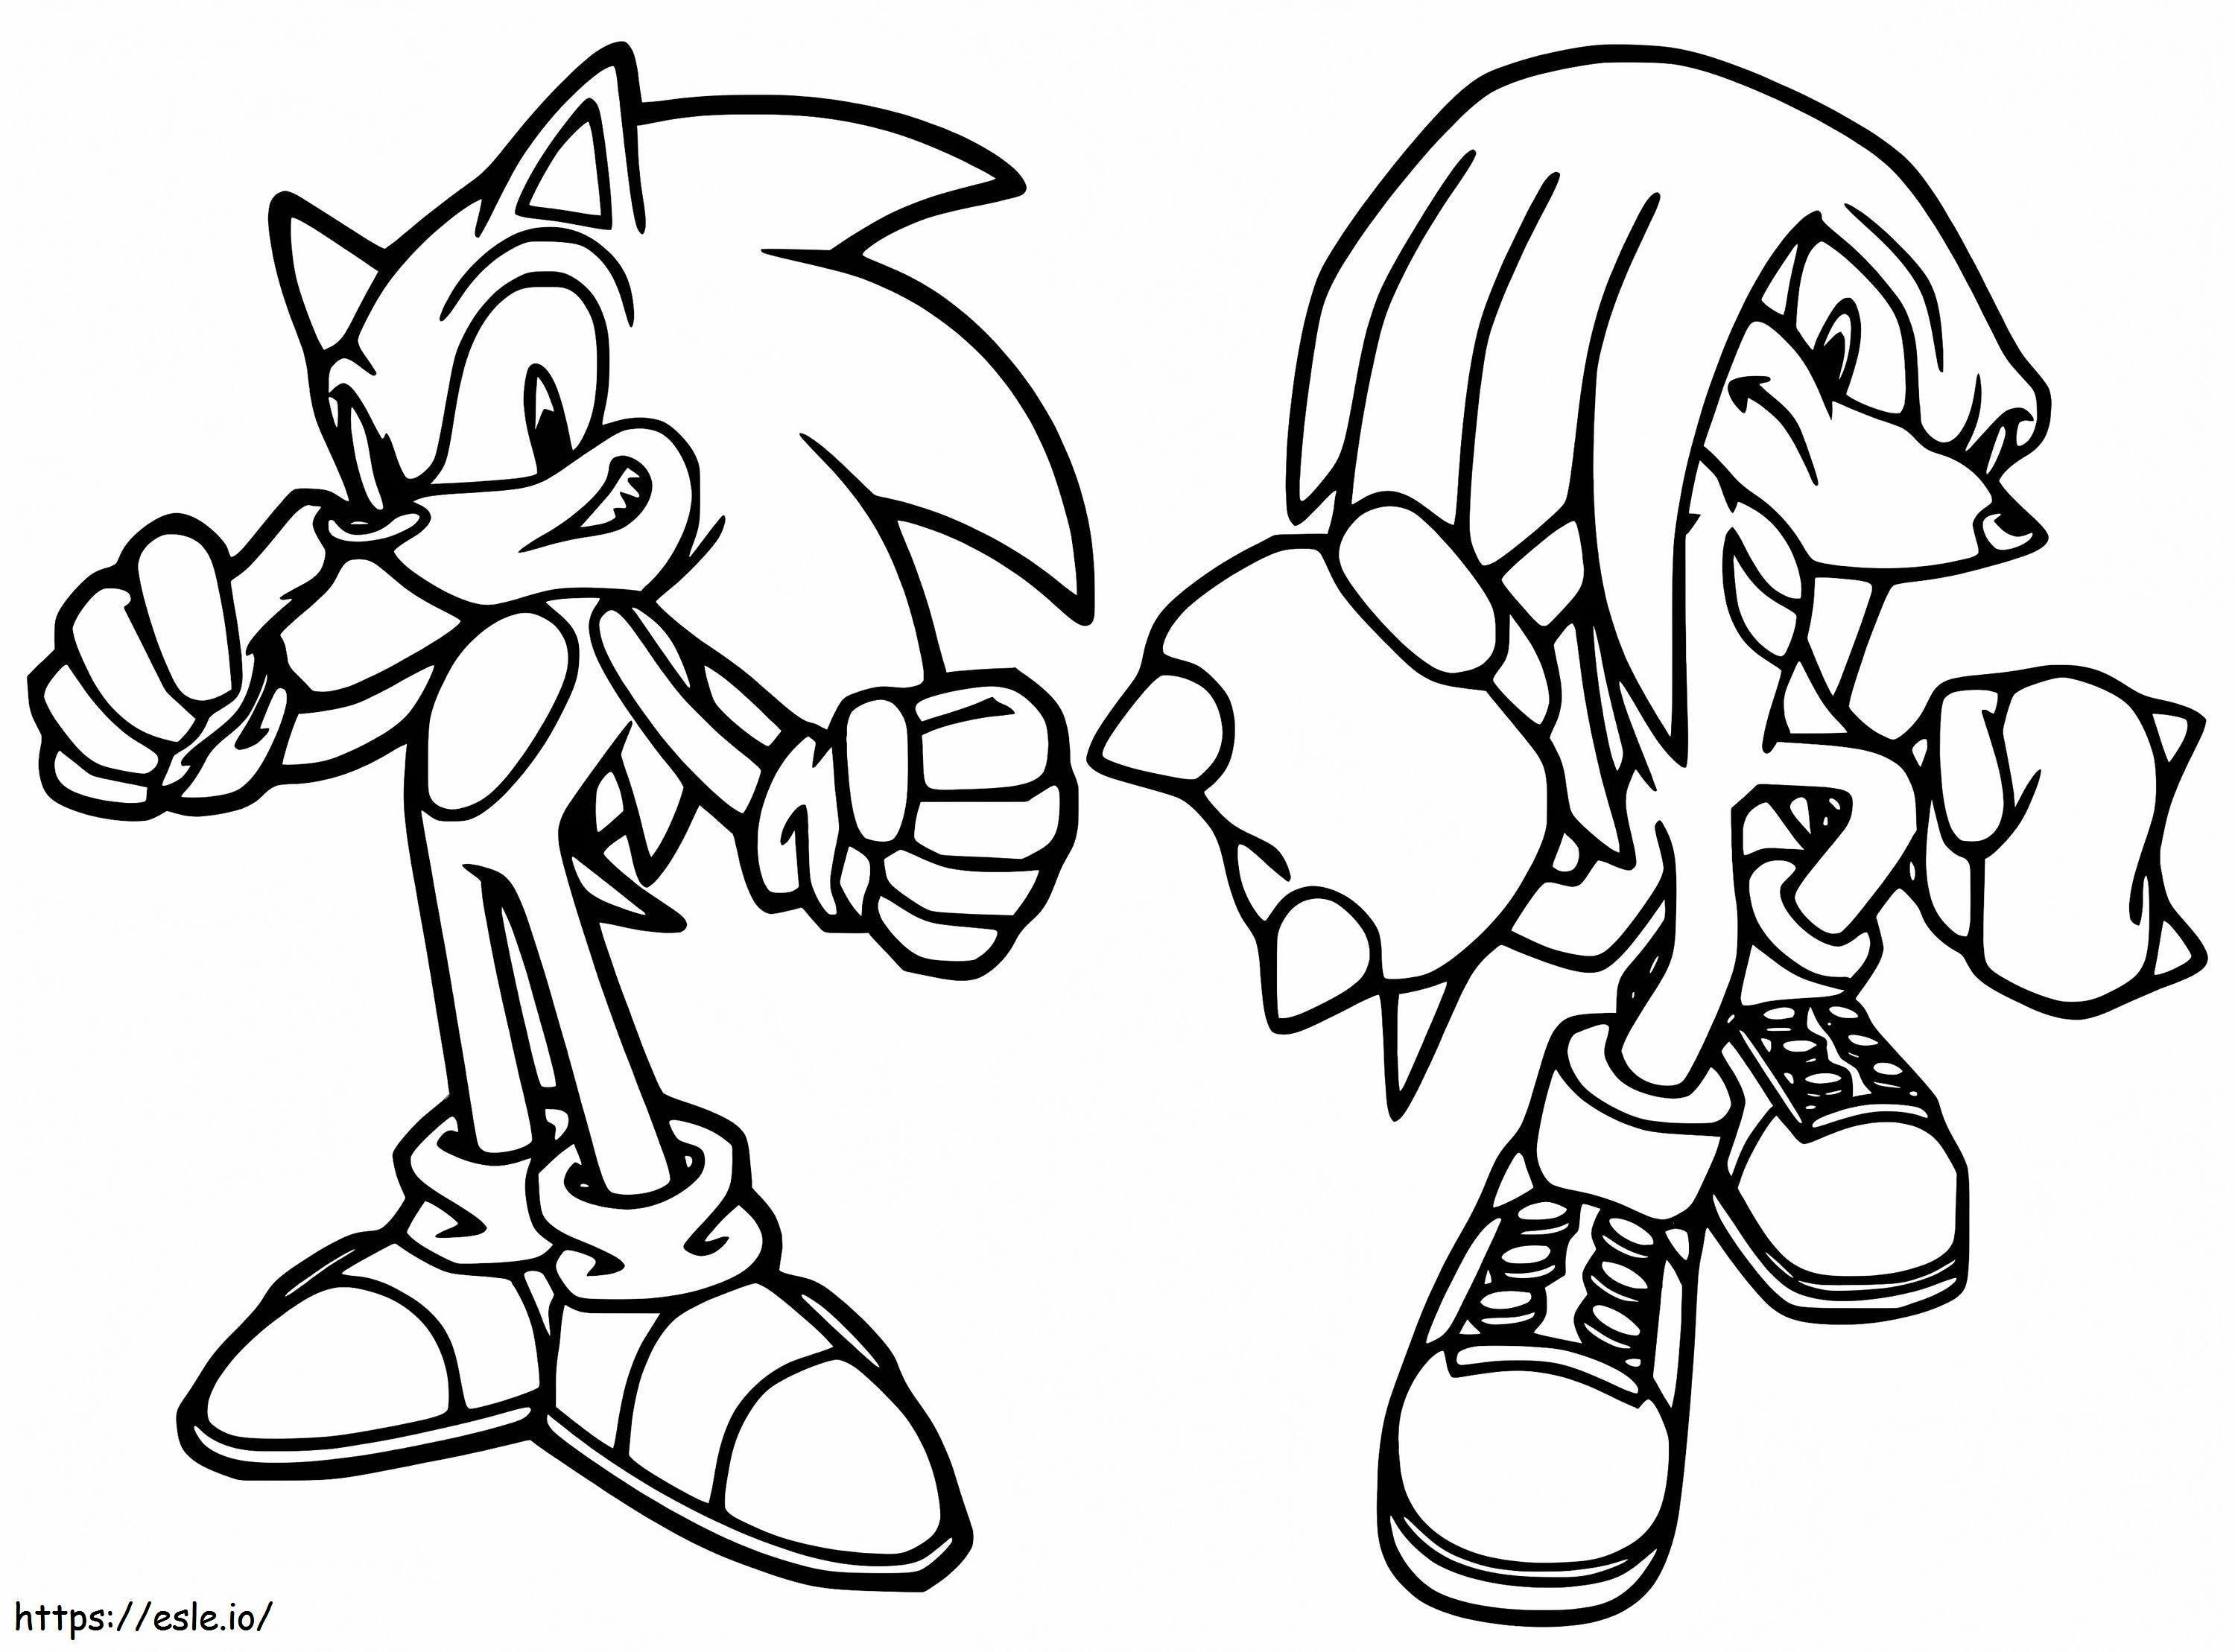 Sonic And Knuckles coloring page